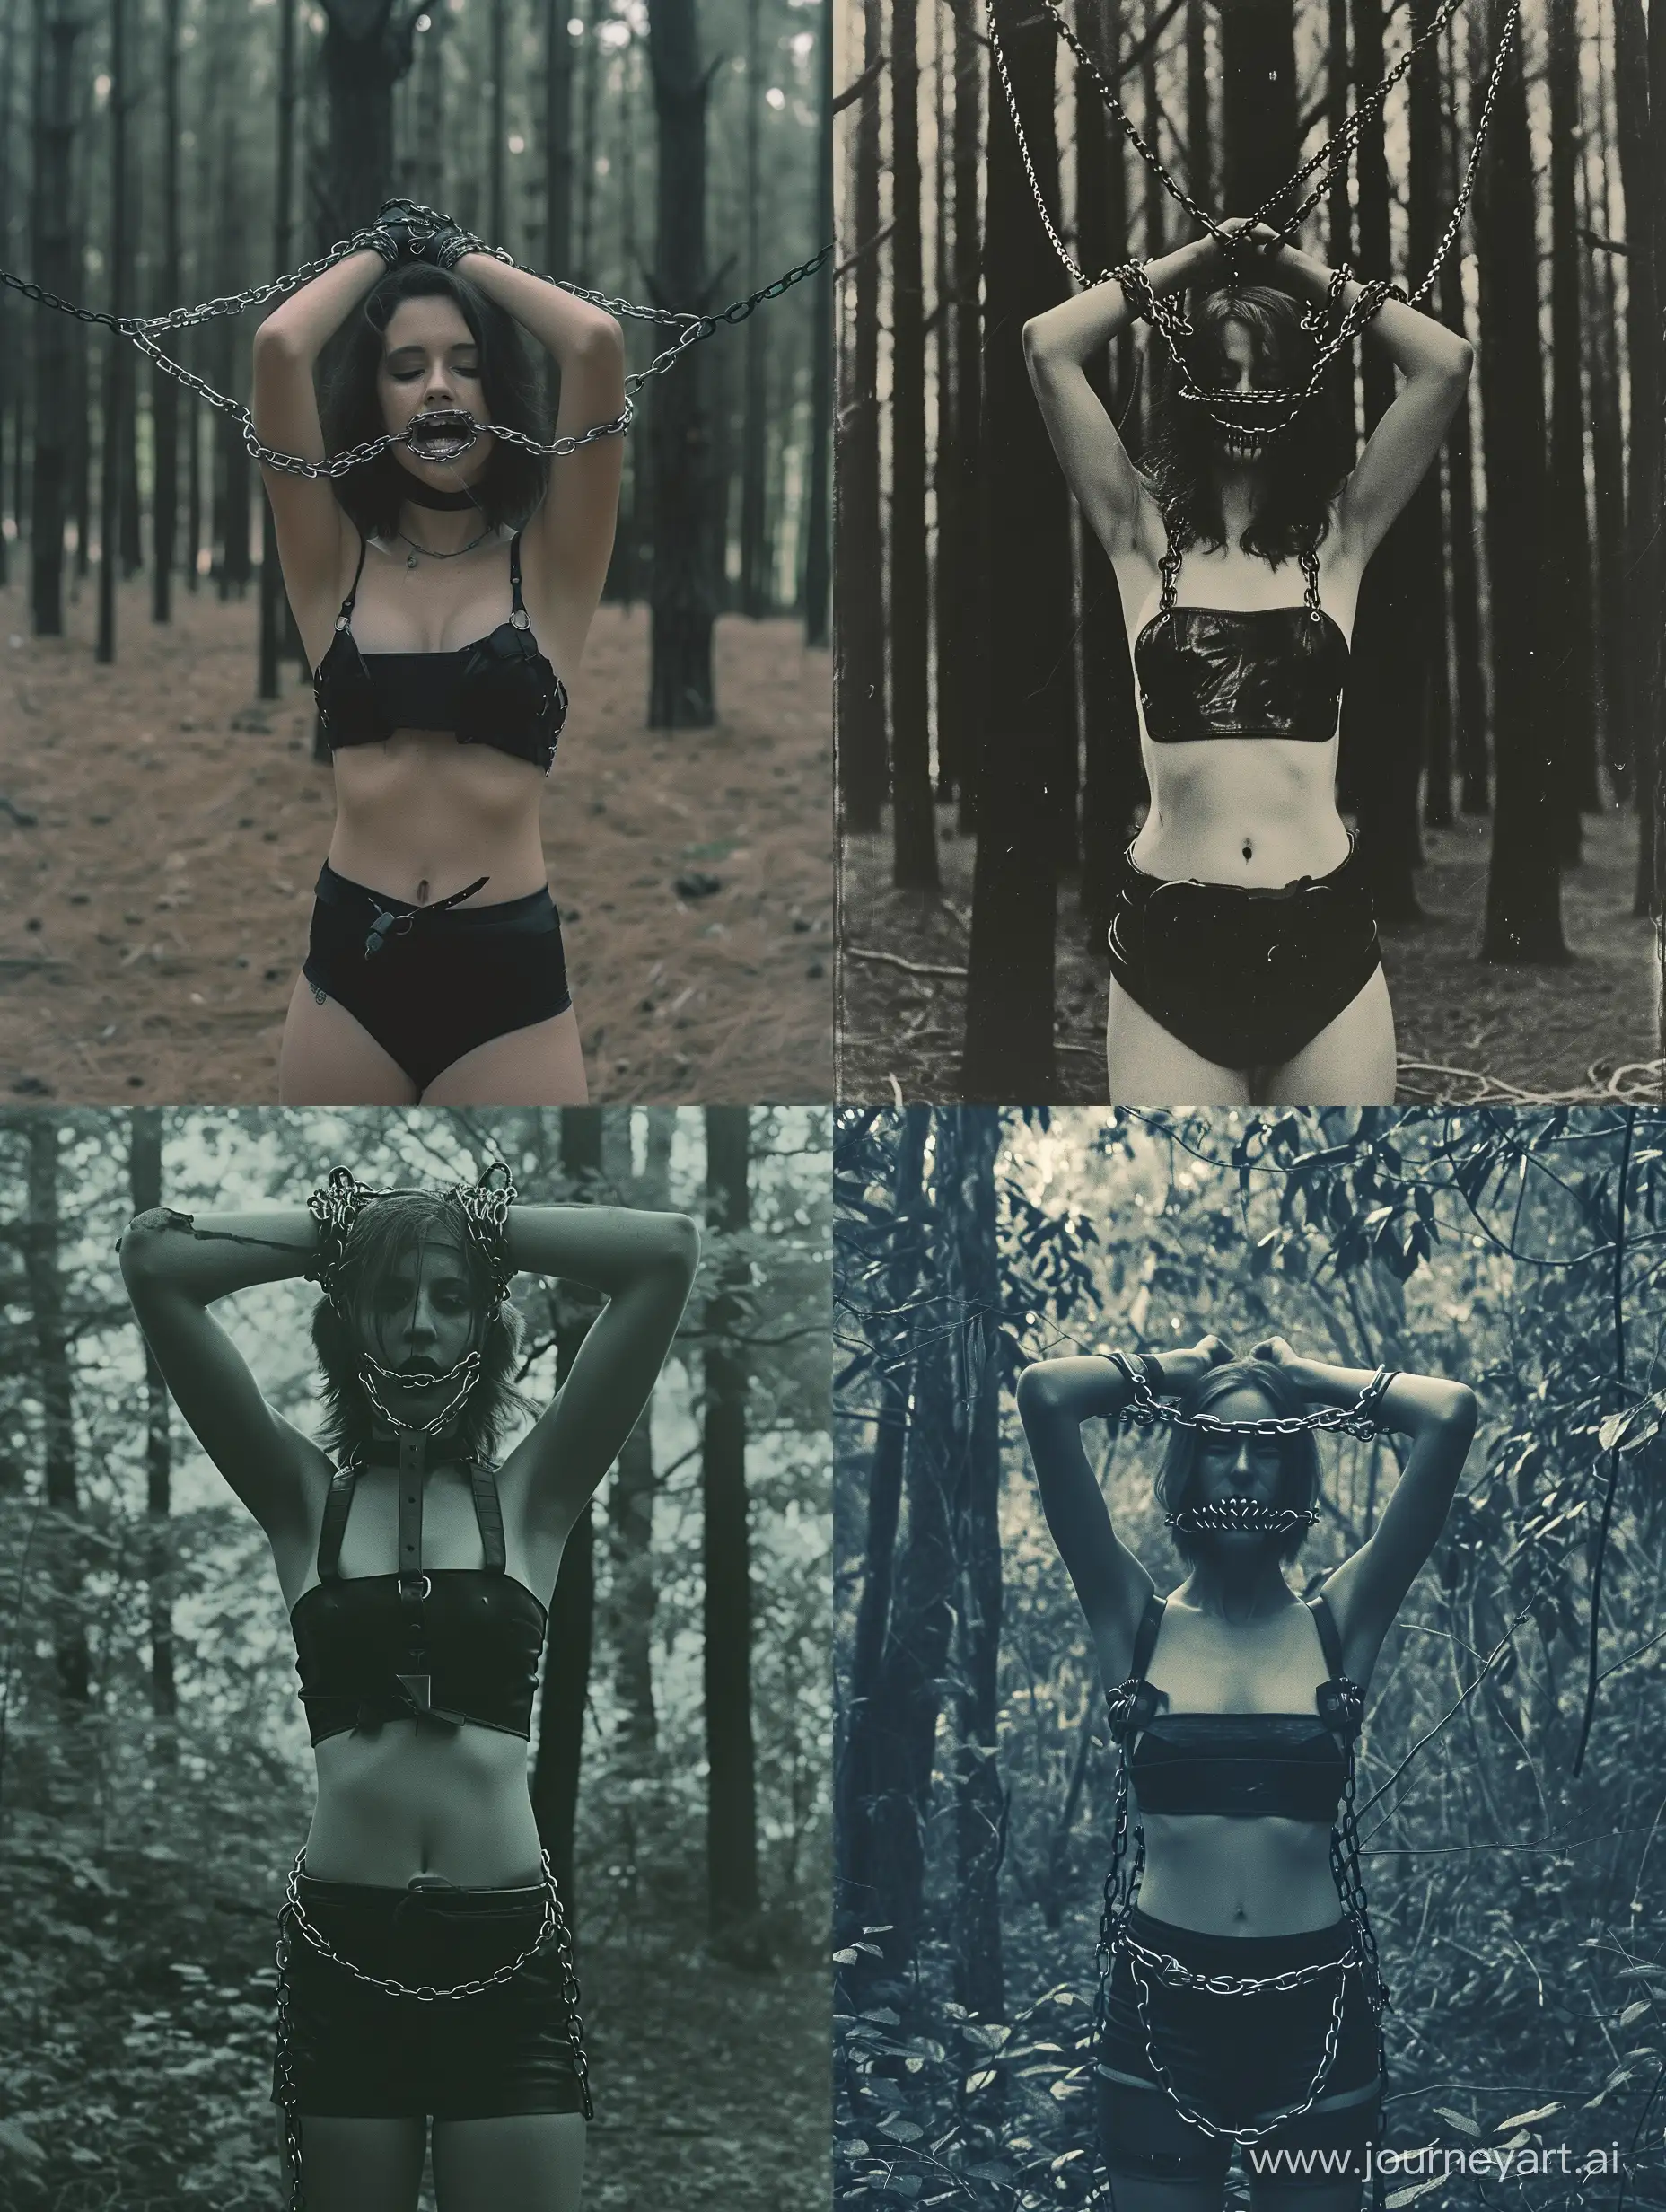 Saturated image of a woman wearing a chained mouth harness in a minimalistic forest, arms bound above her head with chains, dark aesthetic, photo taken with provia